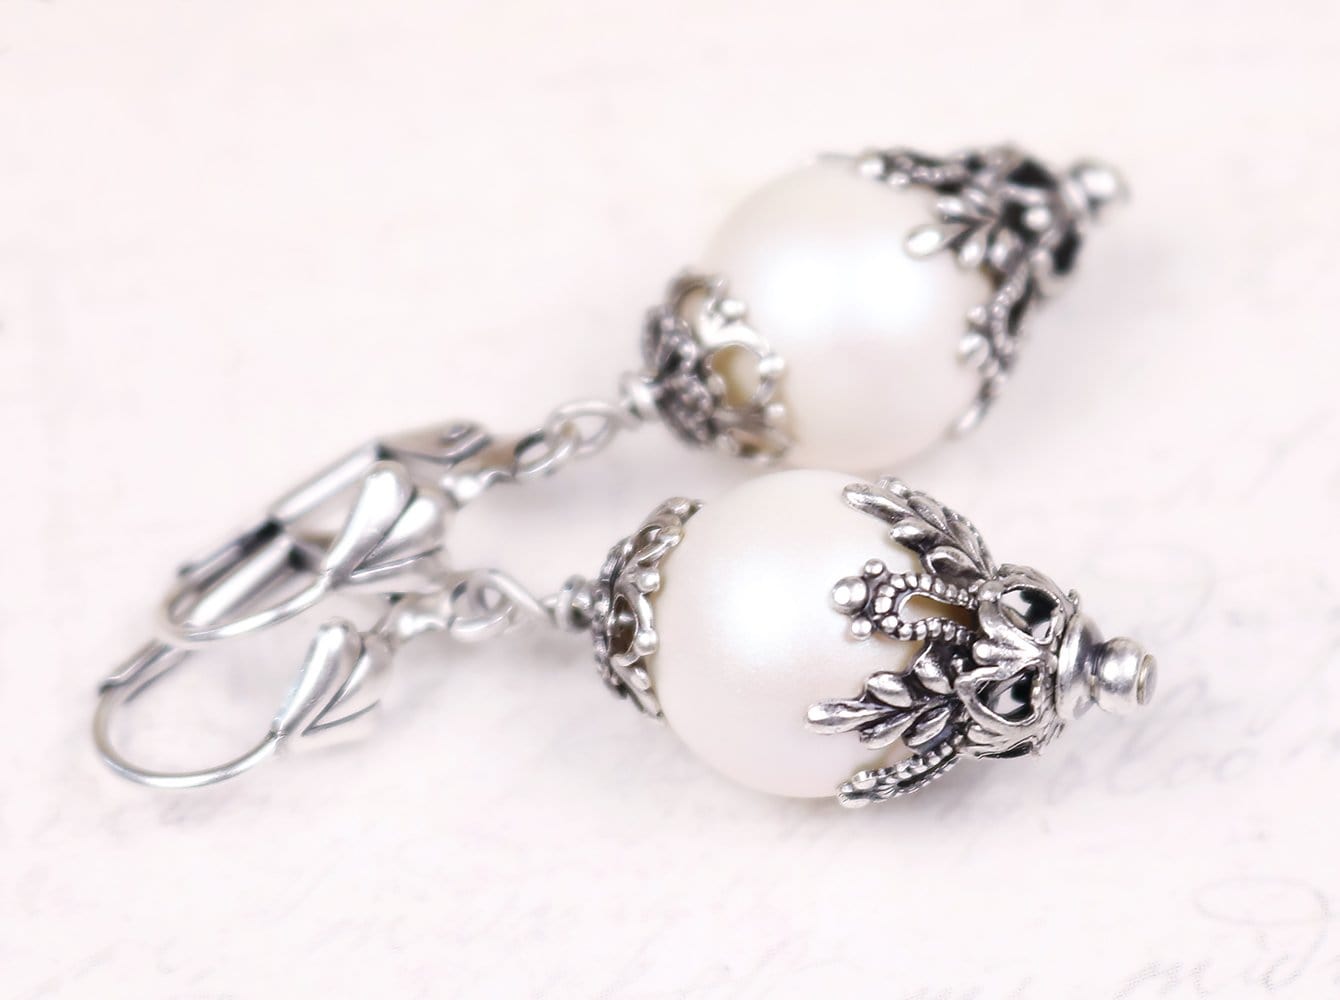 Borgia Earrings in Pearlescent White Pearl and Antiqued Silver by Rabbitwood and Reason